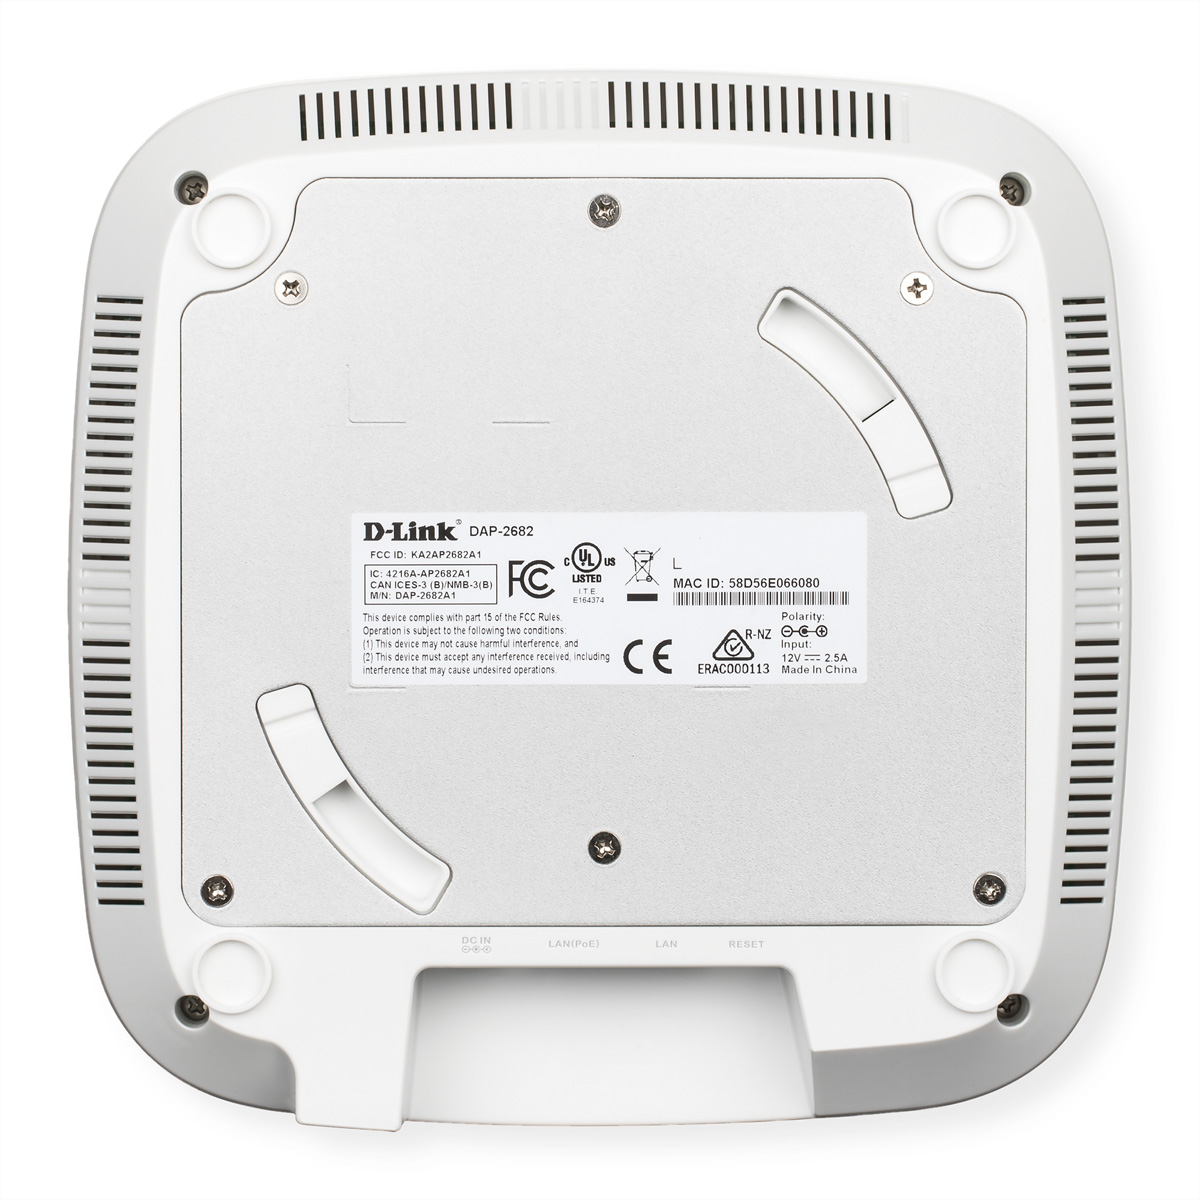 AC2300 Wave 2,3 D-LINK Wireless Points 2 Point Dual-Band DAP-2682 PoE Access Gbit/s Access